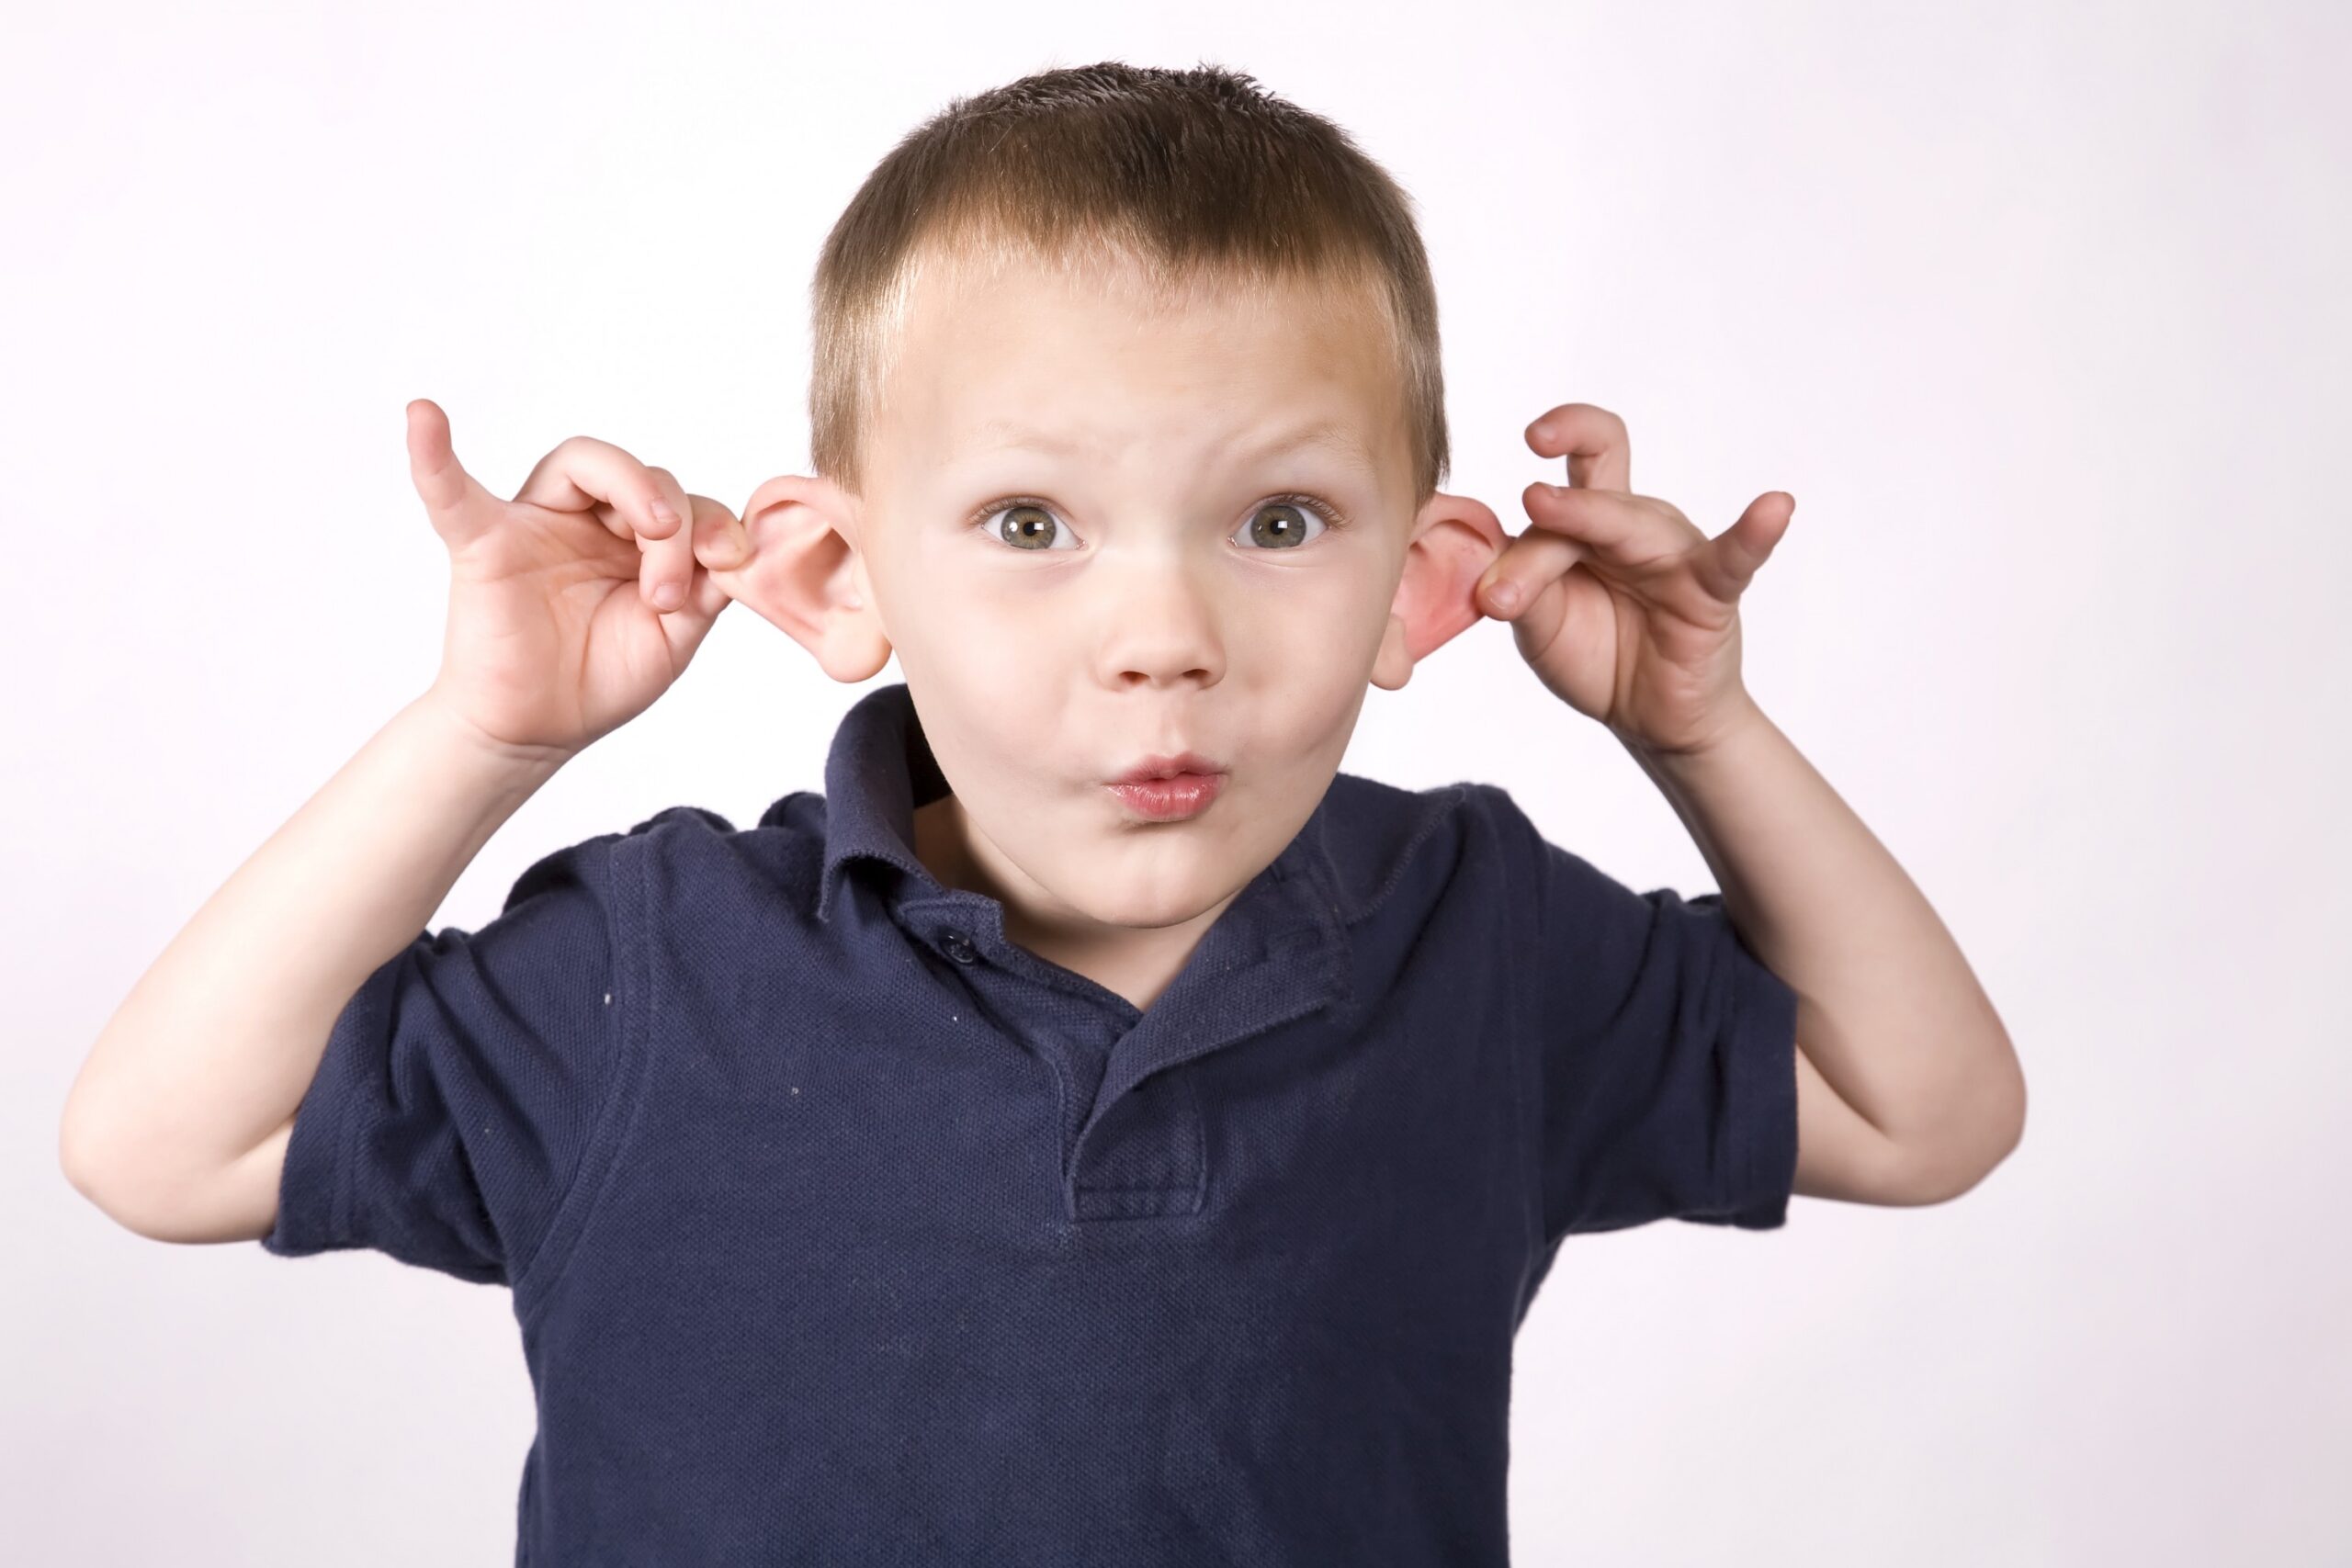 Pulling on Ears is Super-Fun According to Kids